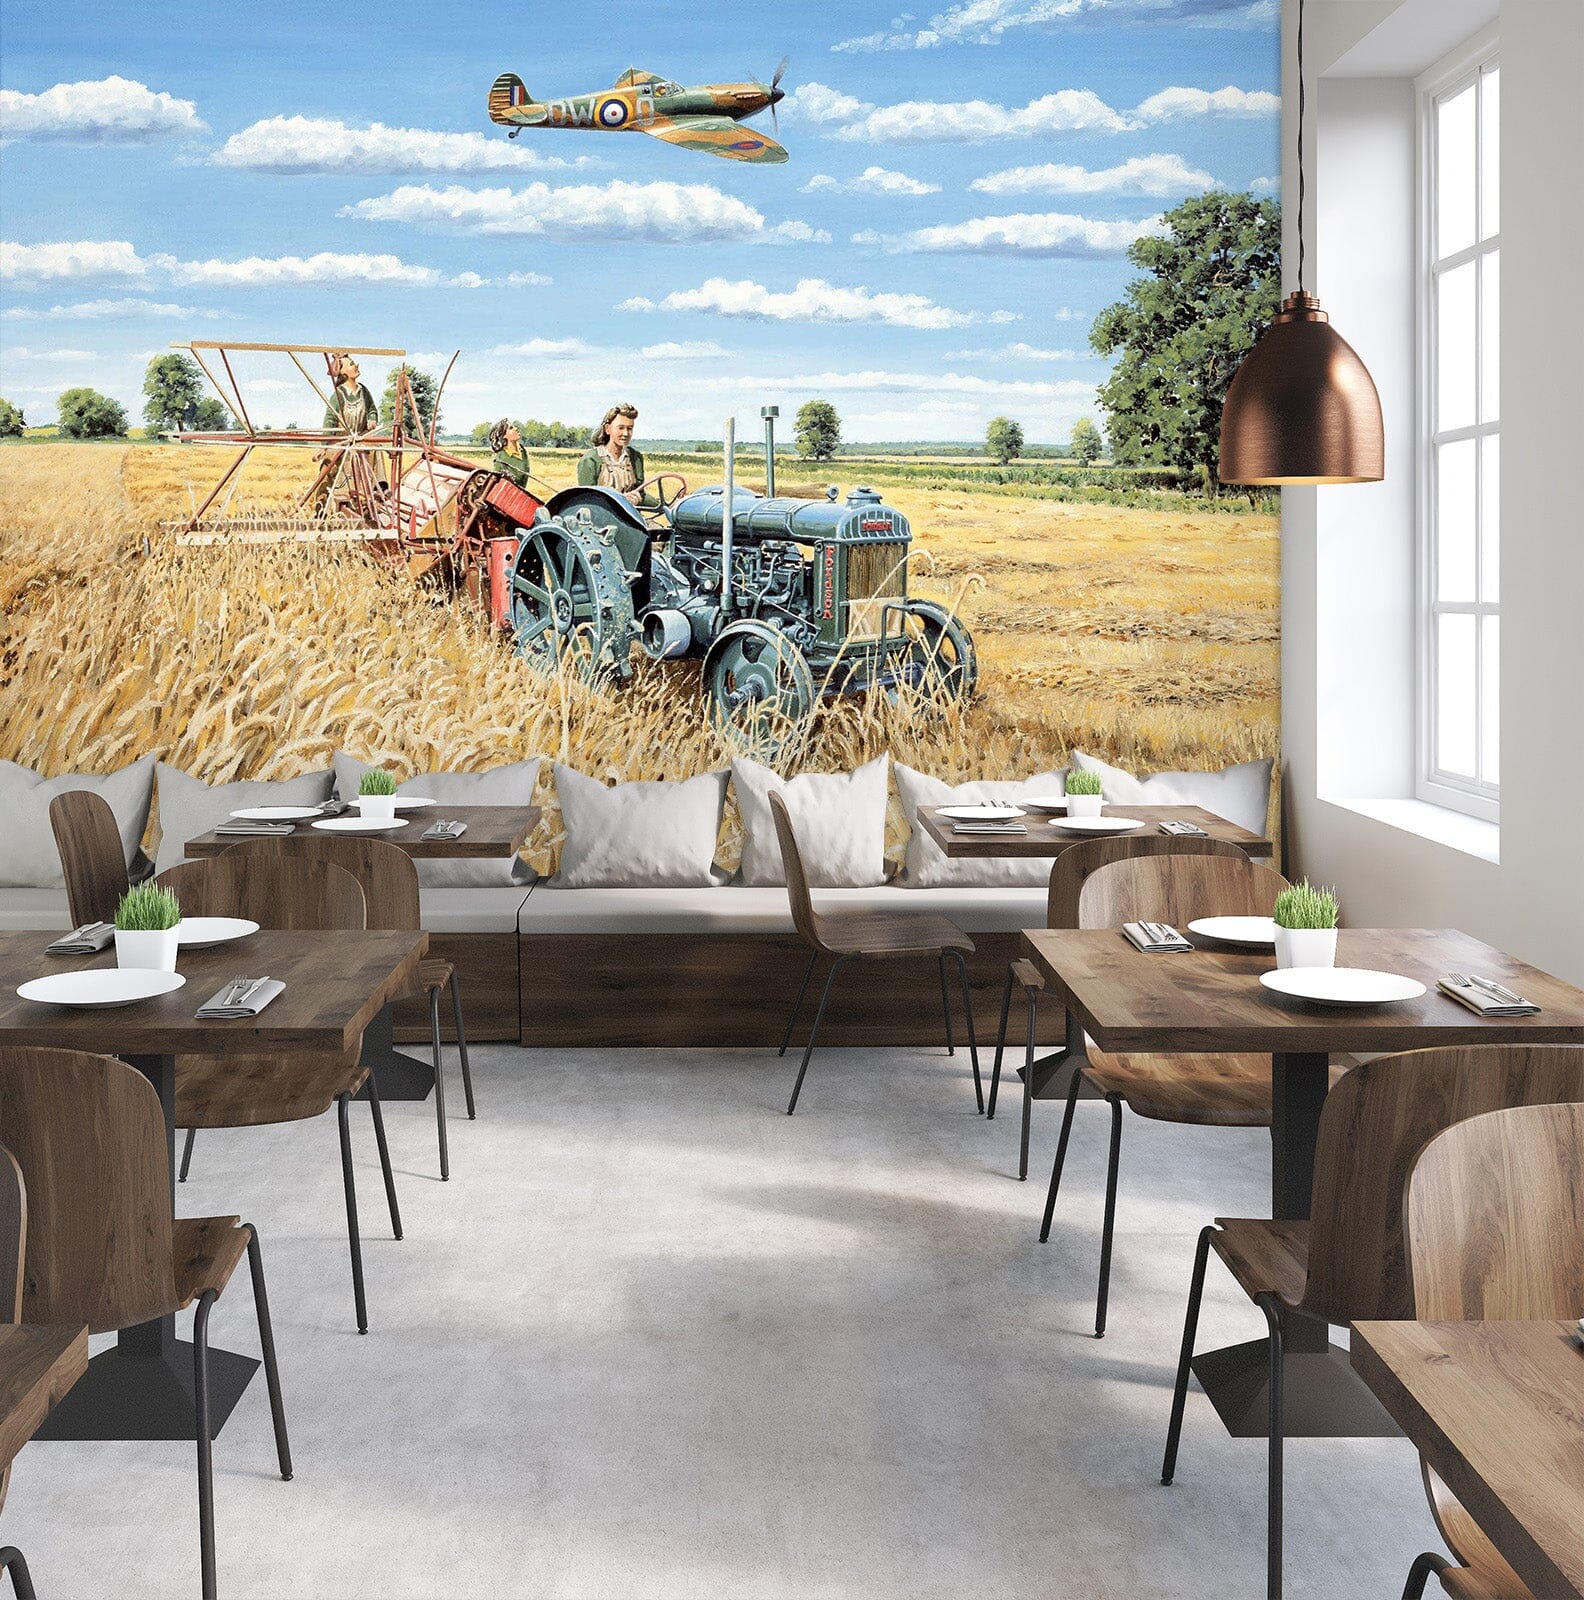 3D Harvesting Victory 1028 Trevor Mitchell Wall Mural Wall Murals Wallpaper AJ Wallpaper 2 